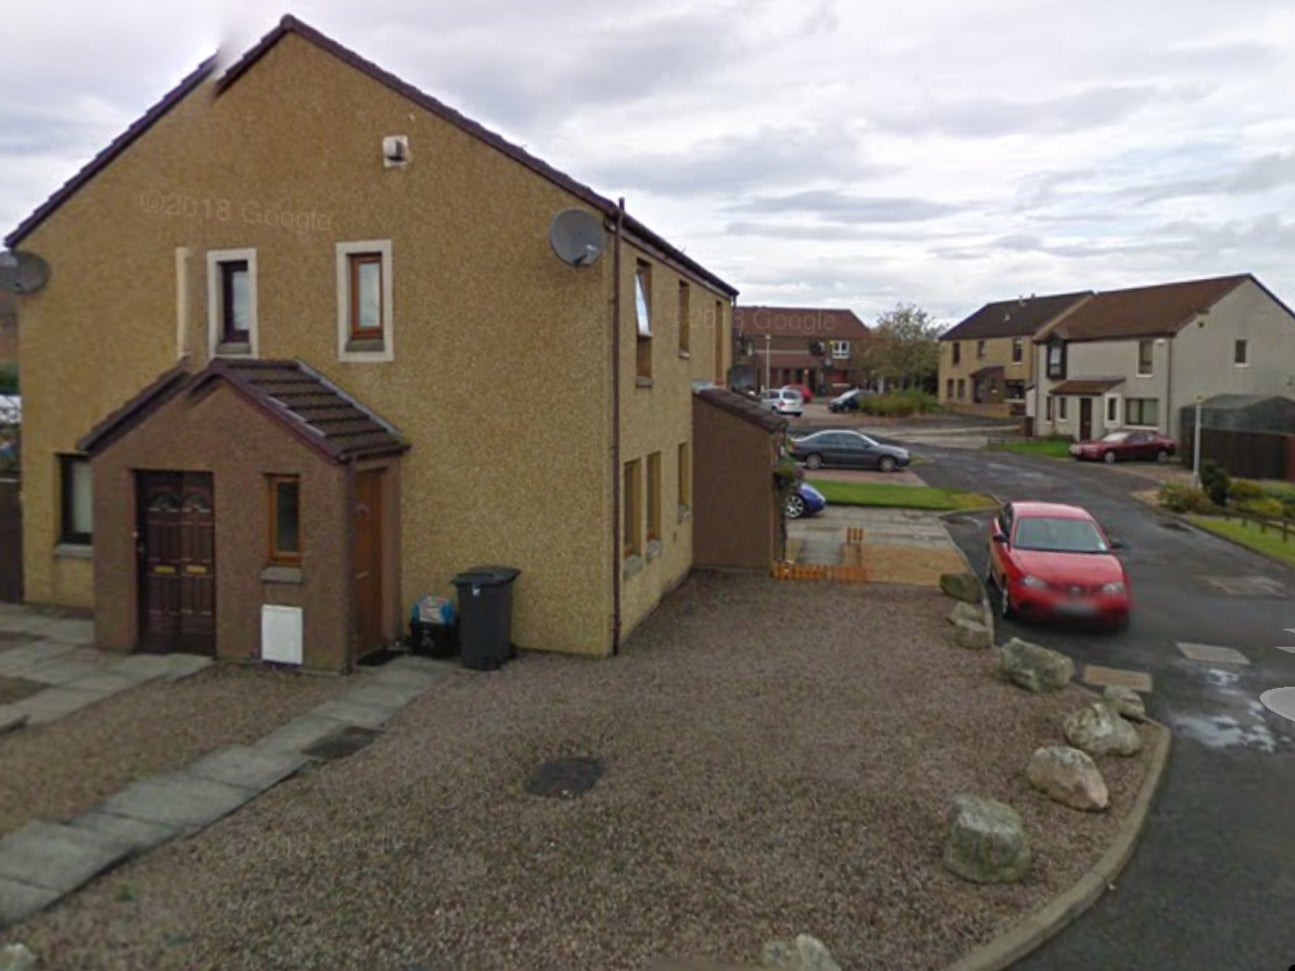 A Google Maps screenshot shows the property on Allison Close in Cove, Aberdeen